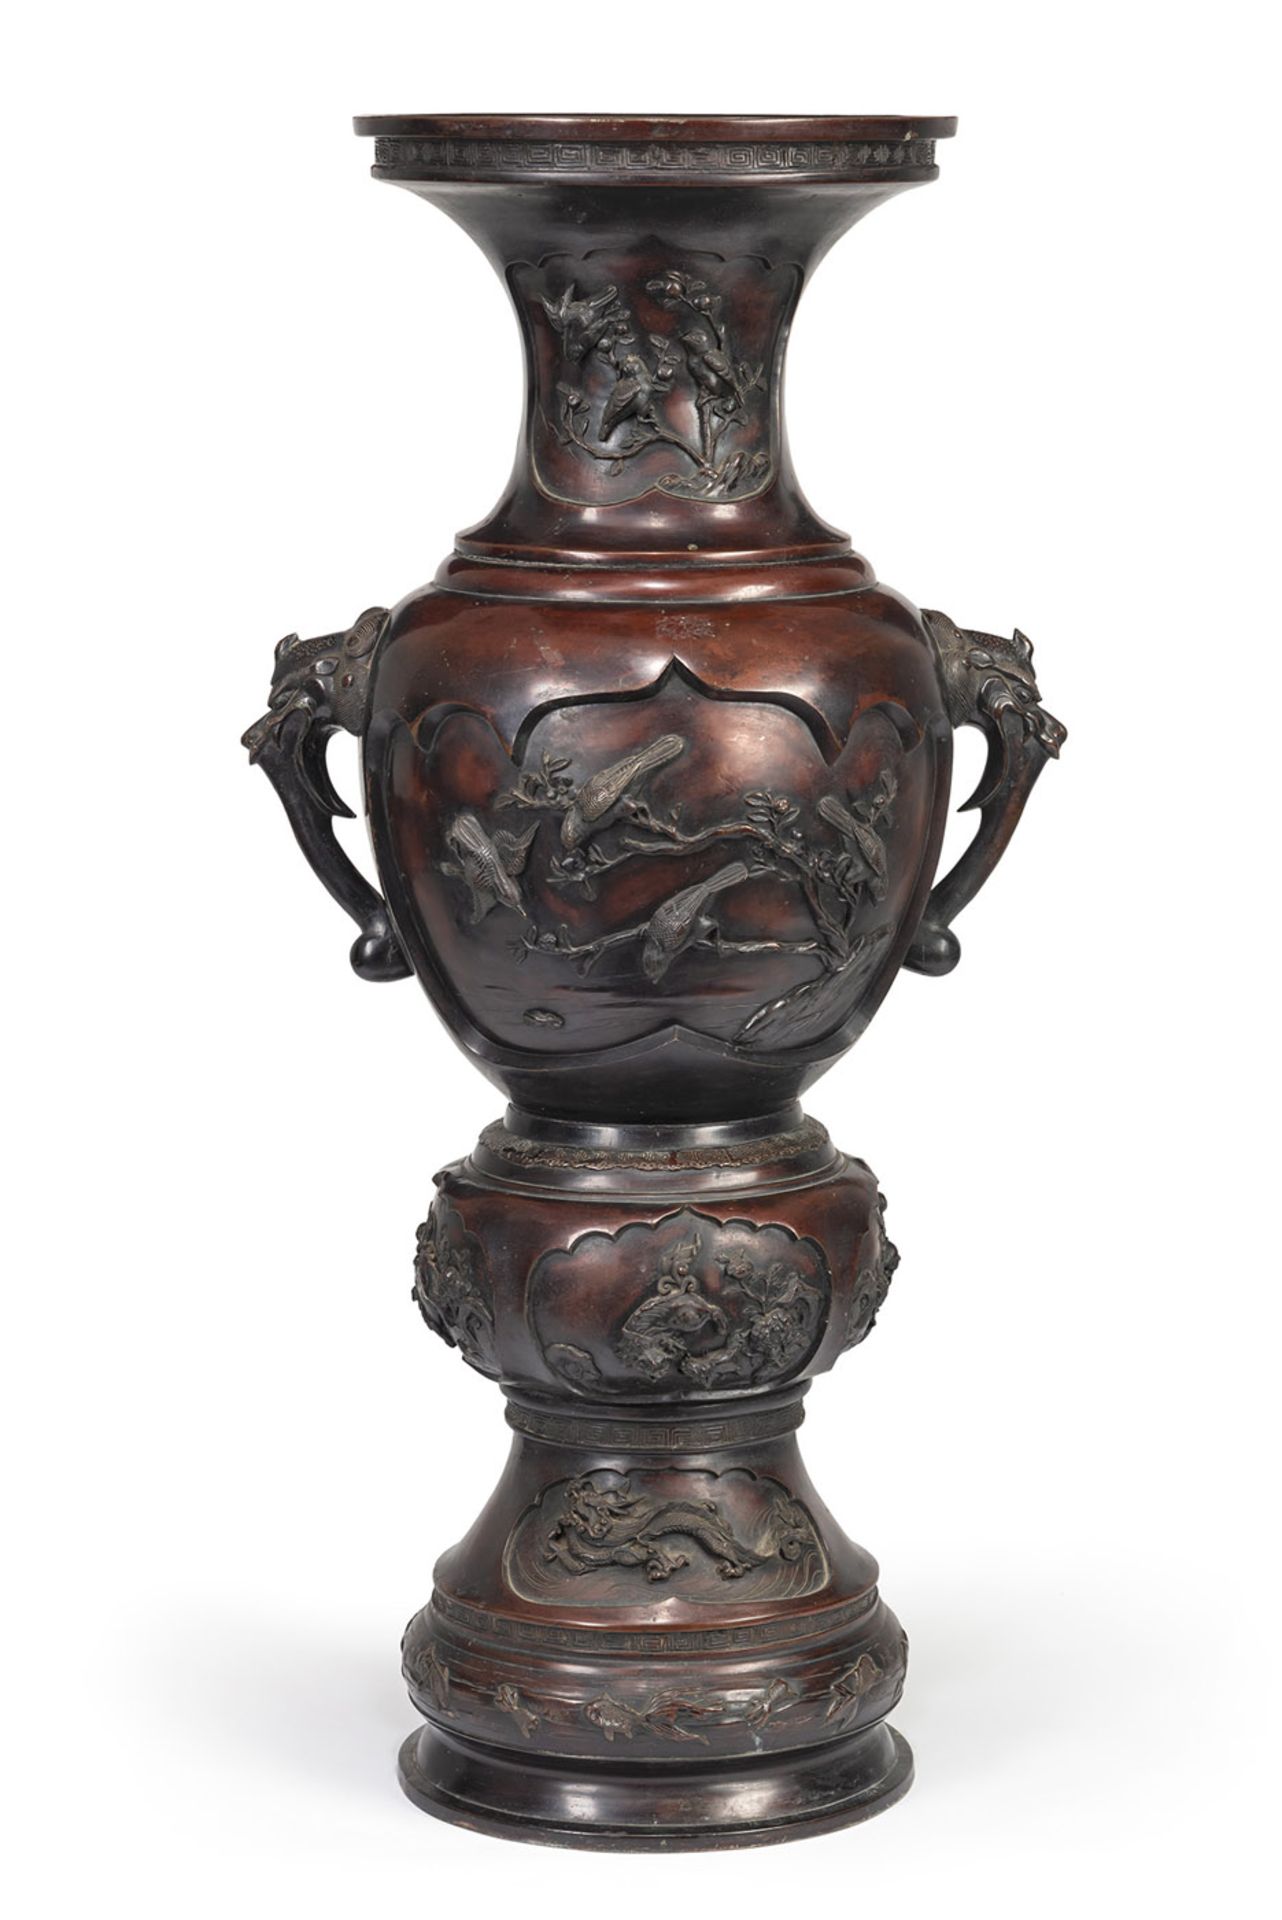 A LARGE BRONZE VASE WITH TWO BAKU HEAD HANDLES AND RESERVES DEPICTING FLOWERS AND BIRD IN RELIEF ON